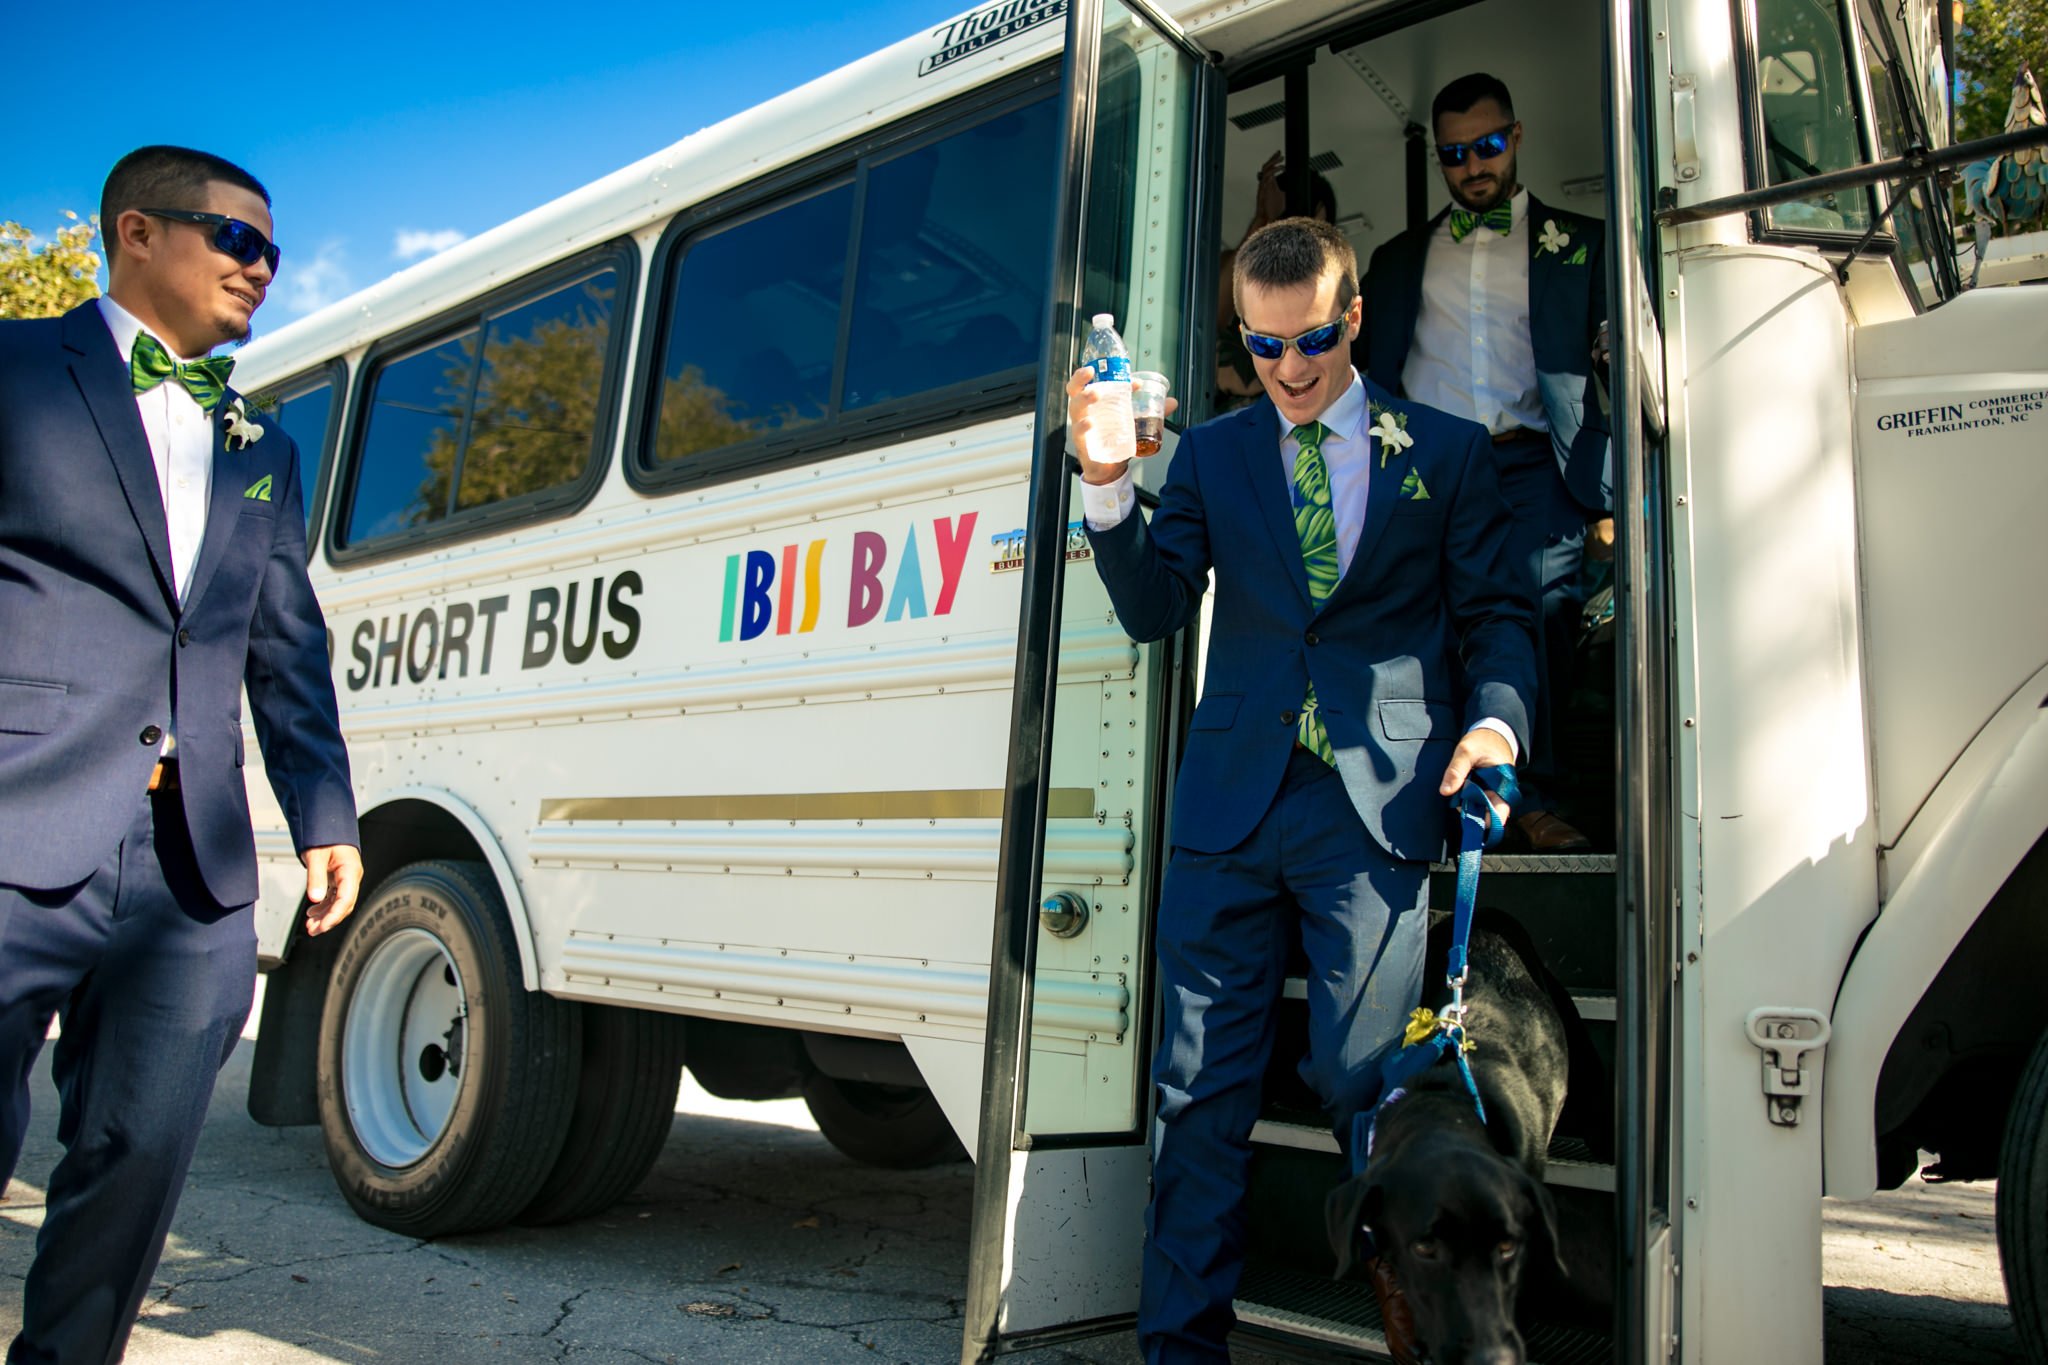 The best man and a groomsman, accompanied by a dog, boarding a bus.